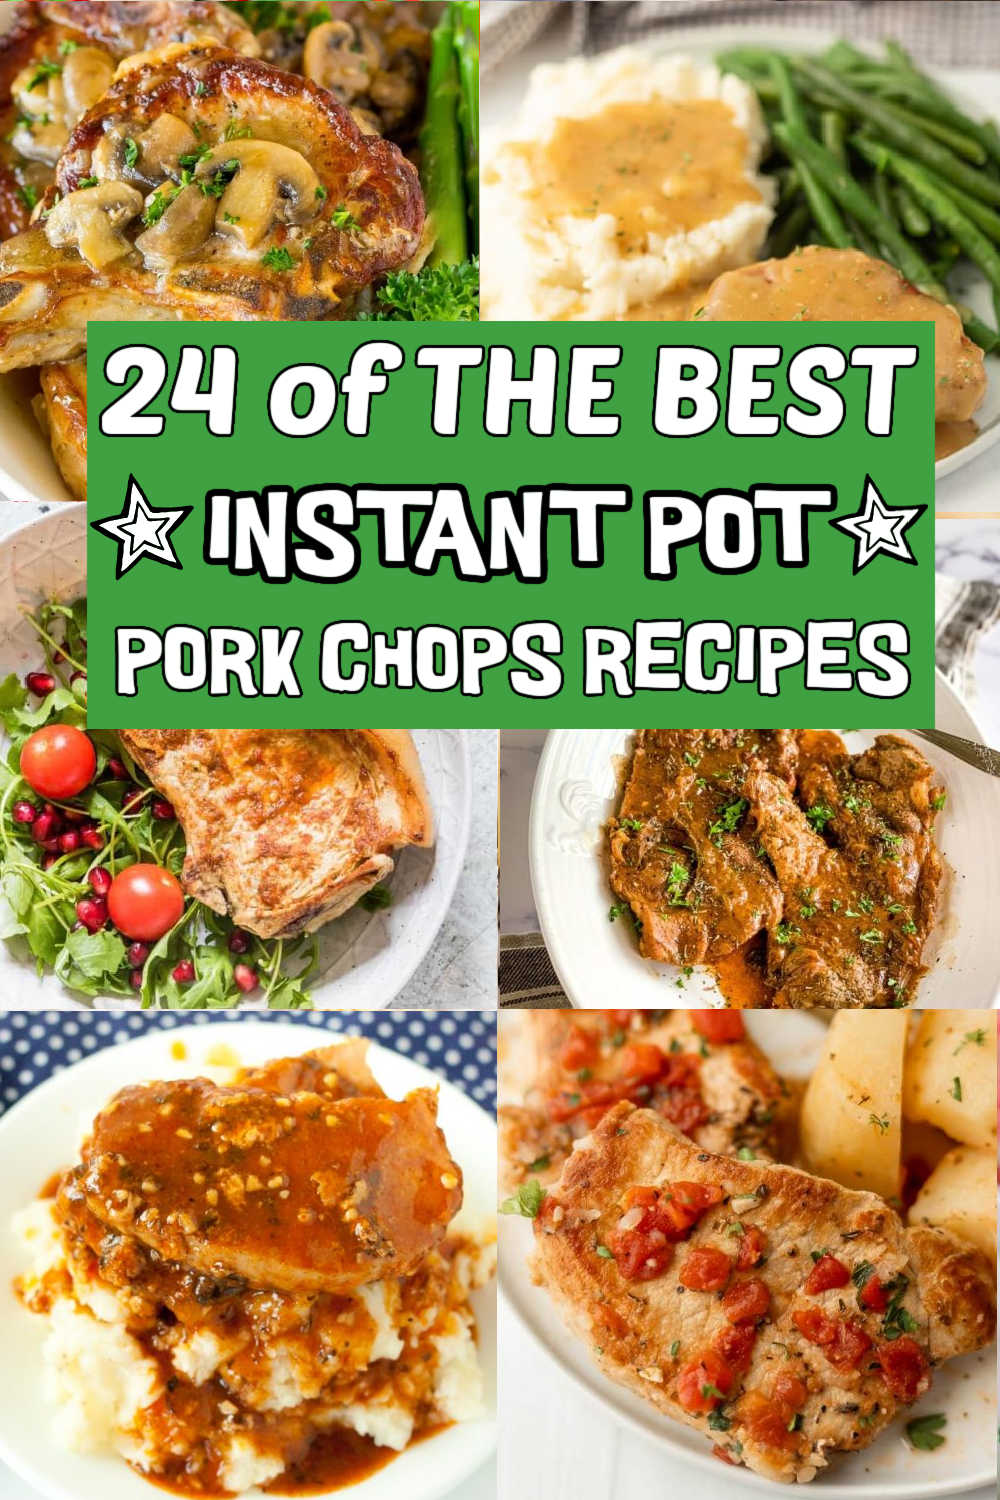 If you are looking for Pork Chop Recipes, we have gathered 24 Instant Pot Pork Chop Recipes that are easy to make. You can even add in your favorite potatoes and carrots to complete your meal. #eatingonadime #instantpotporkchops #porkchops #instantpot